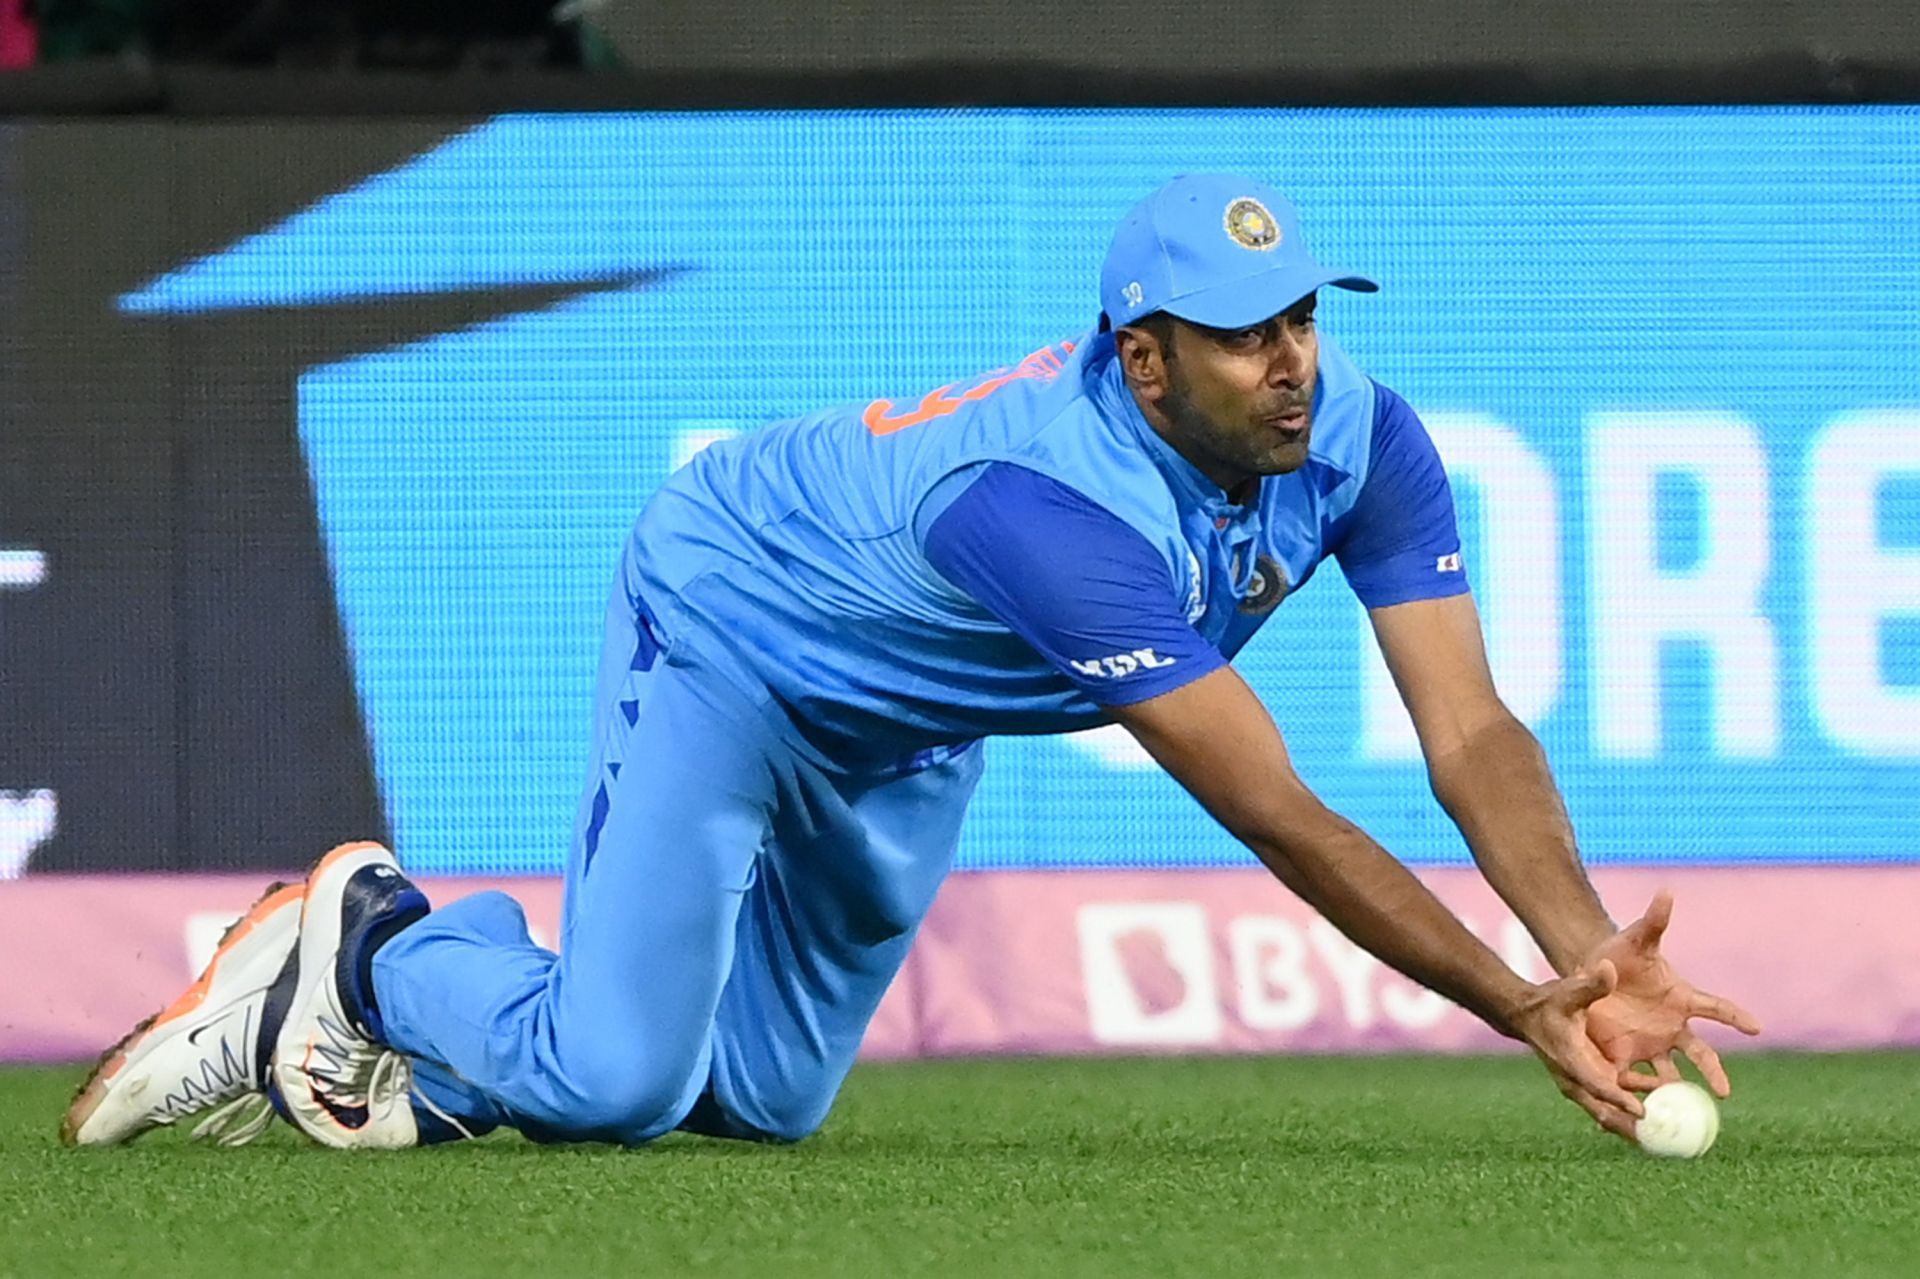 Ravichandran Ashwin conceded 23 runs without picking up a wicket in his 3 overs